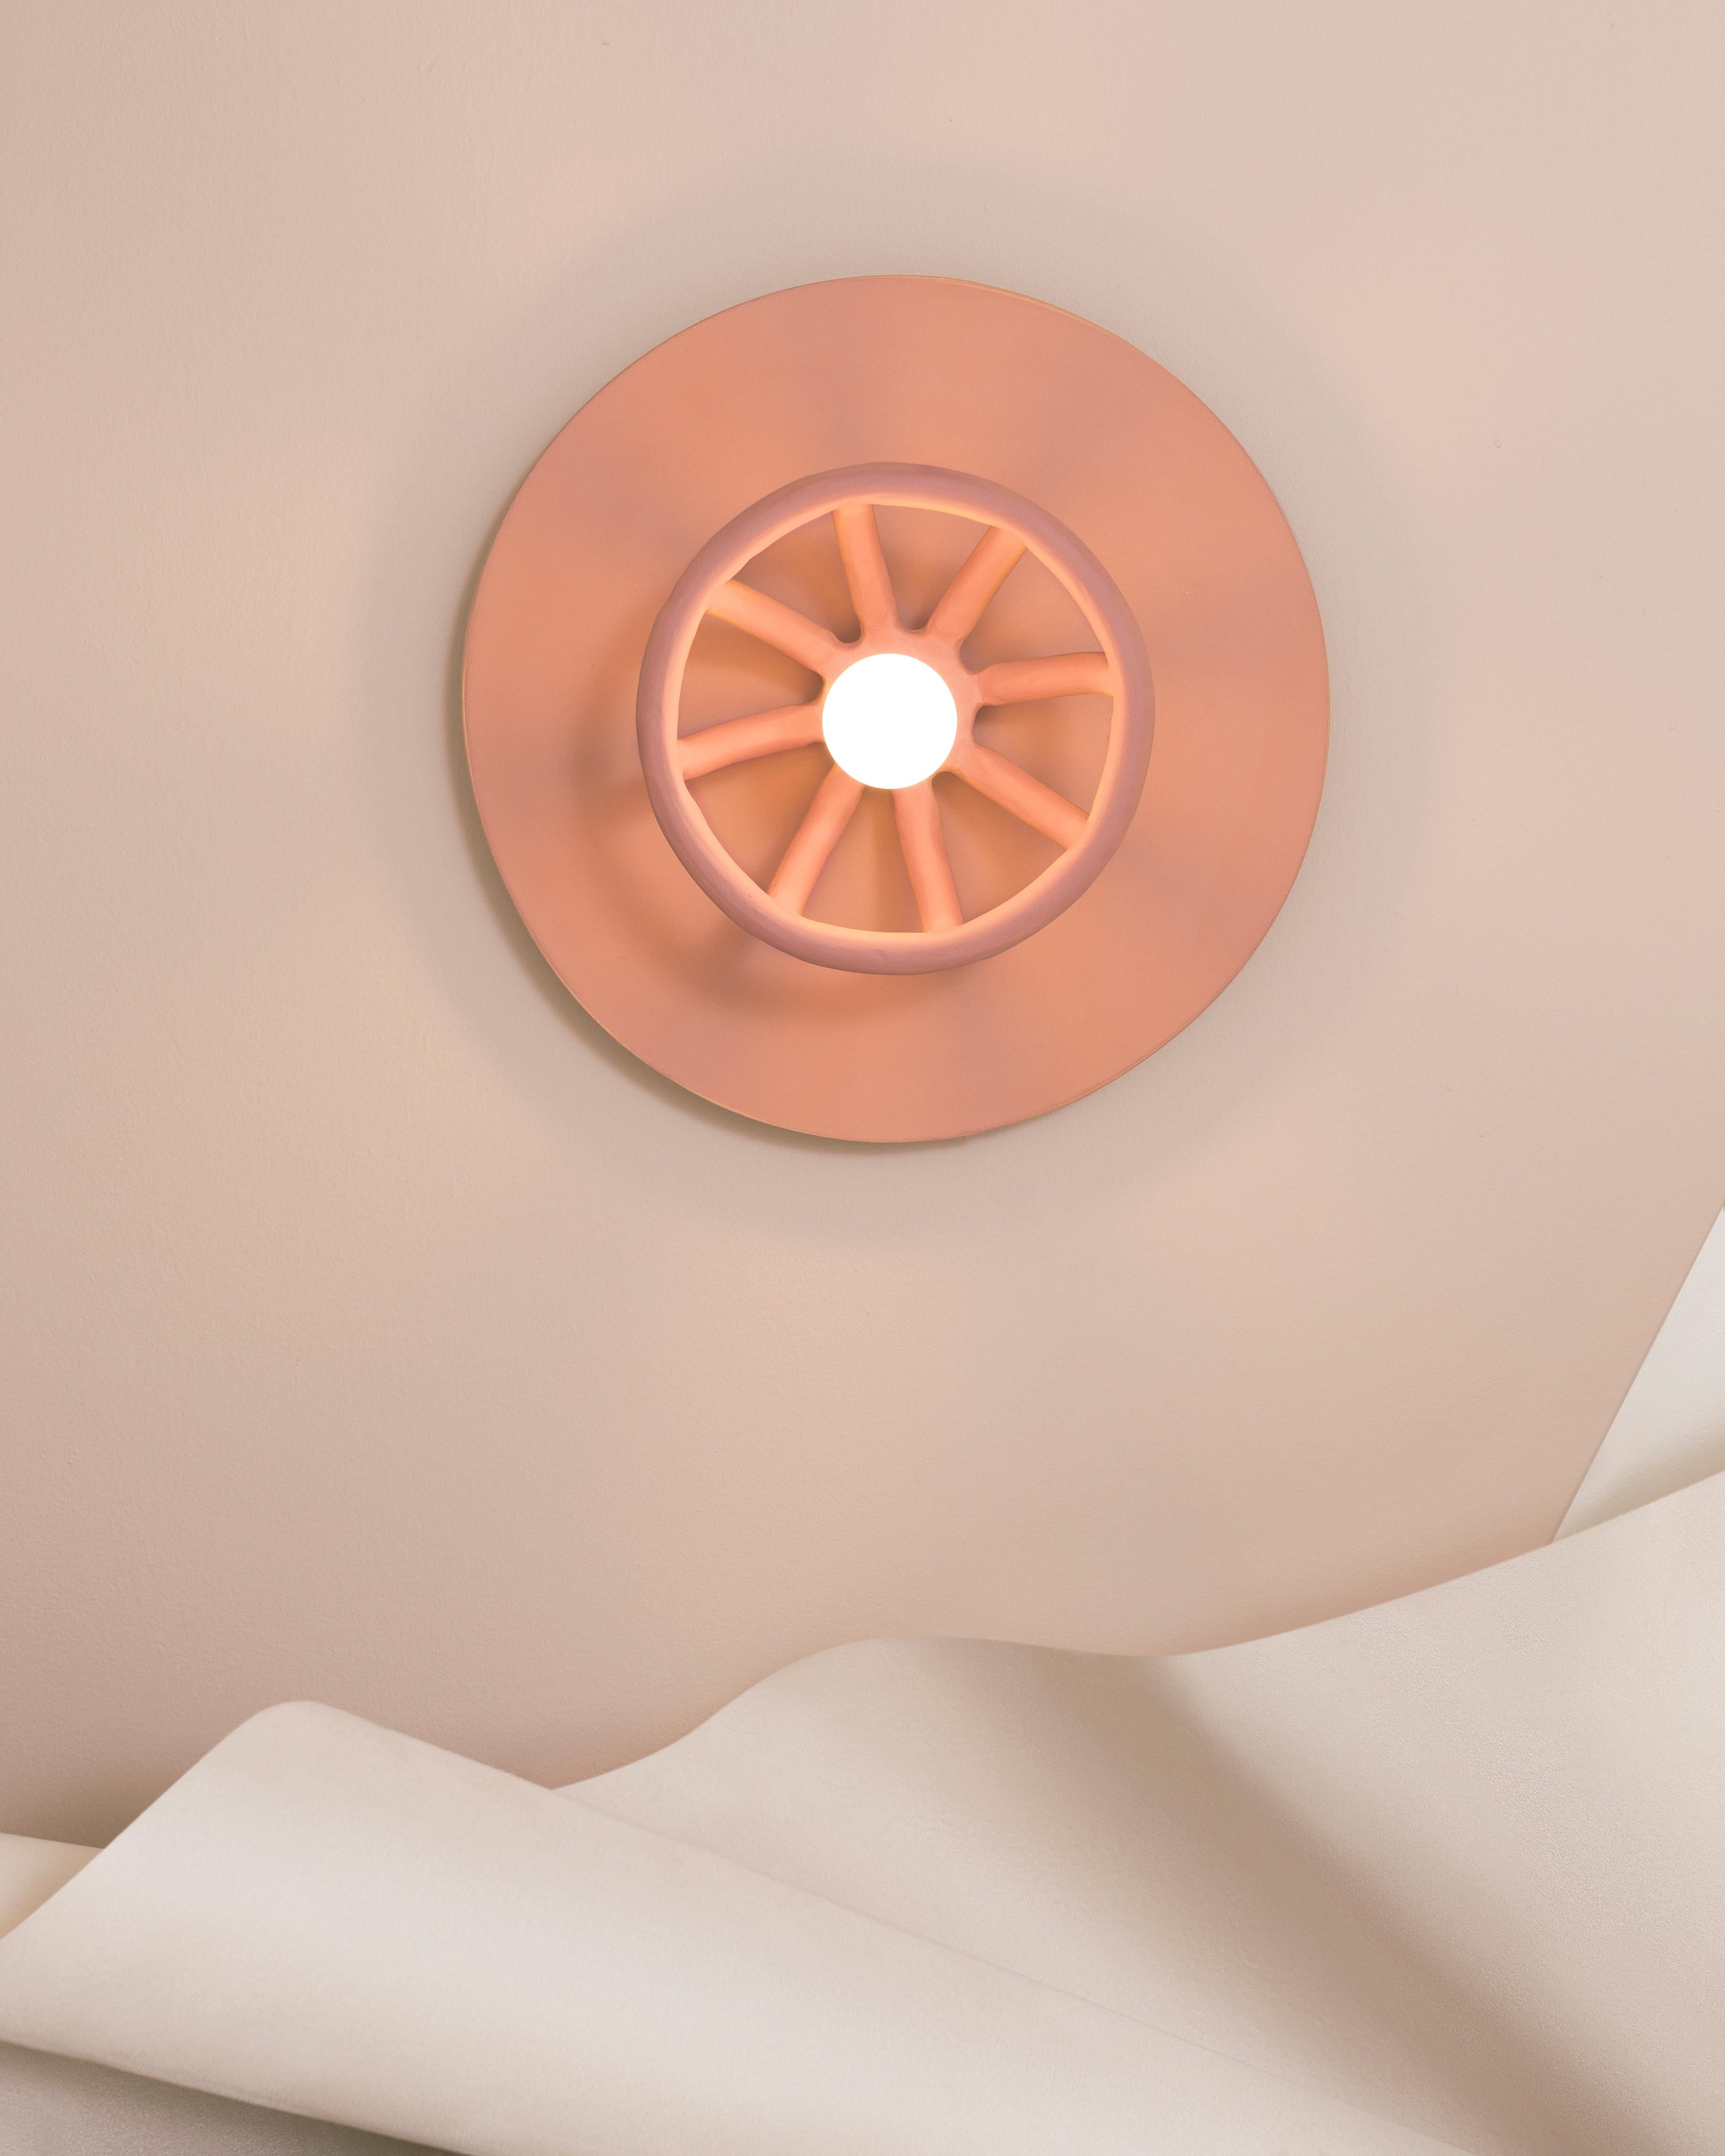 The hand-built ceramic coils cast a dramatic sunburst pattern. The stoneware and terracotta backplate adds warmth, while the glow is punctuated by the exposed light bulb, referencing the rays of light that radiate from the sun.

Material: Speckled